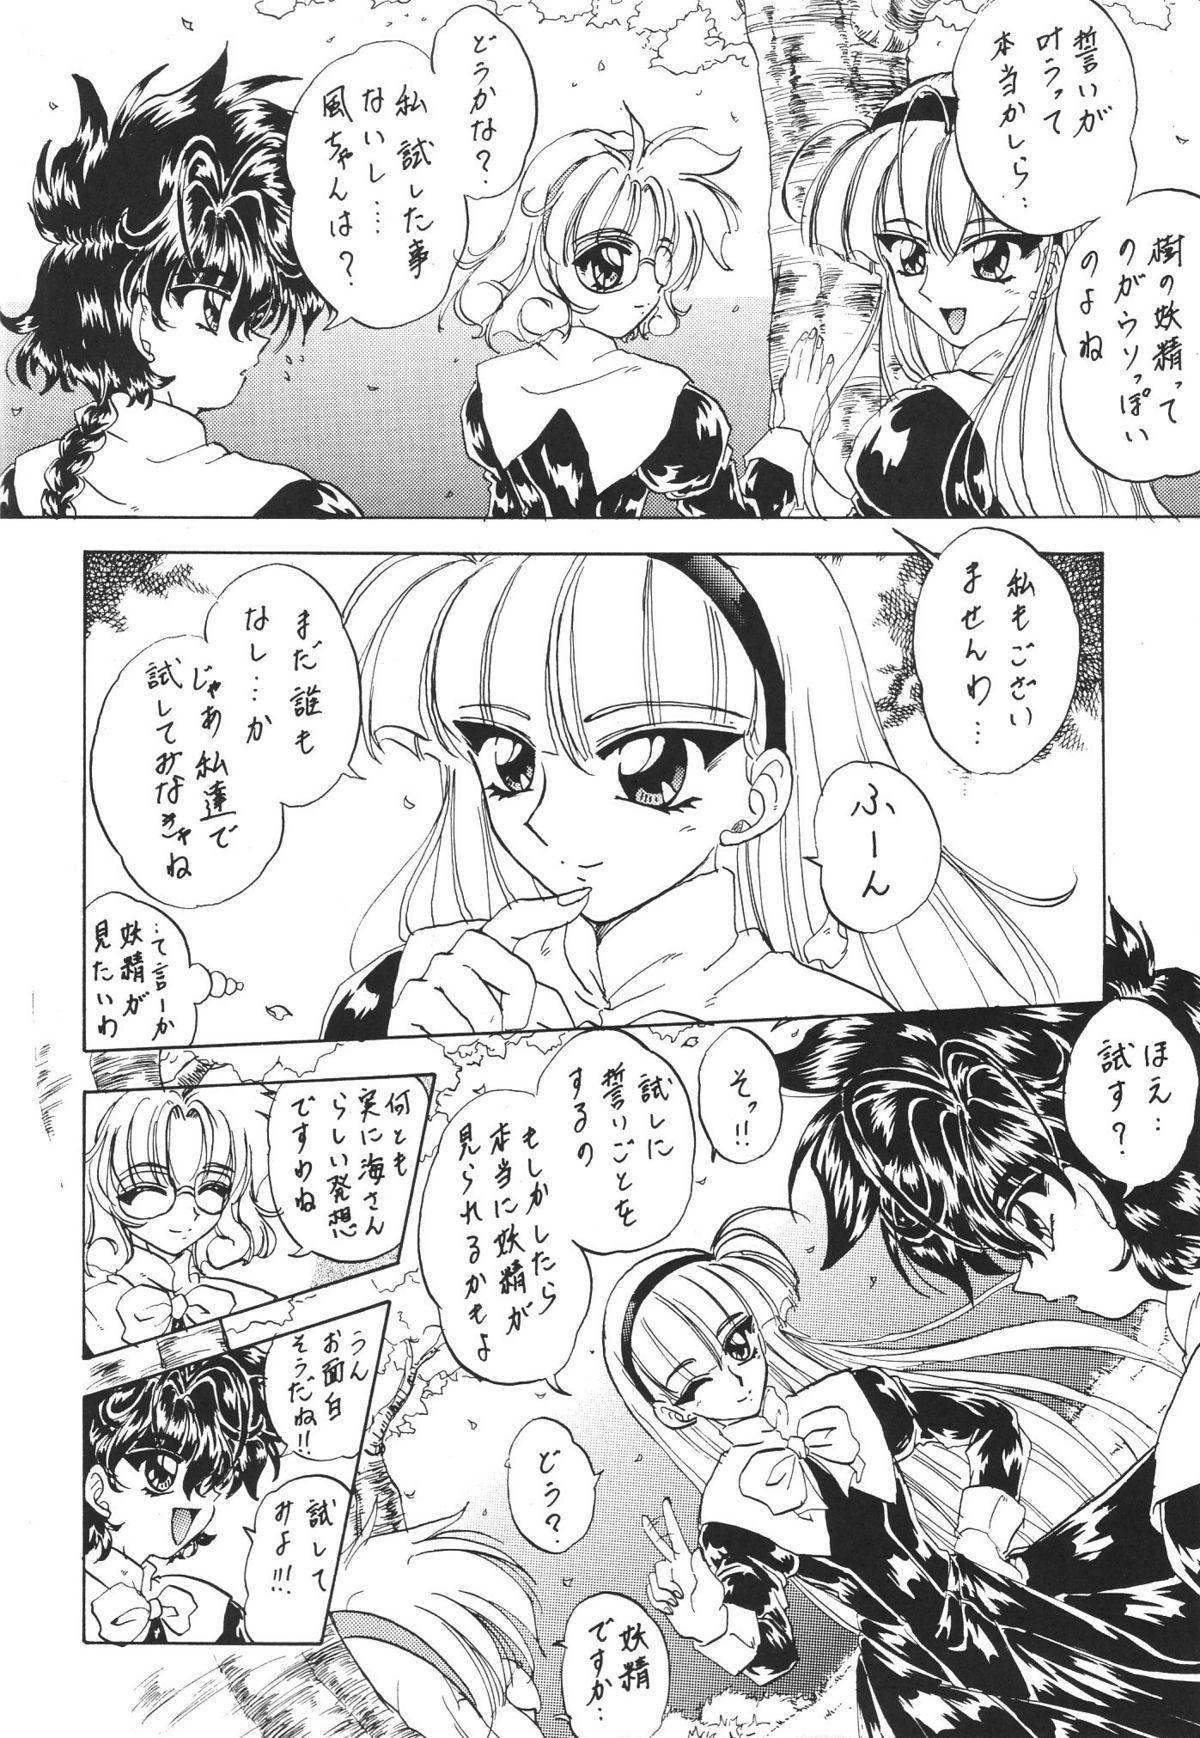 Threesome Stale World V - Magic knight rayearth Phat Ass - Page 7